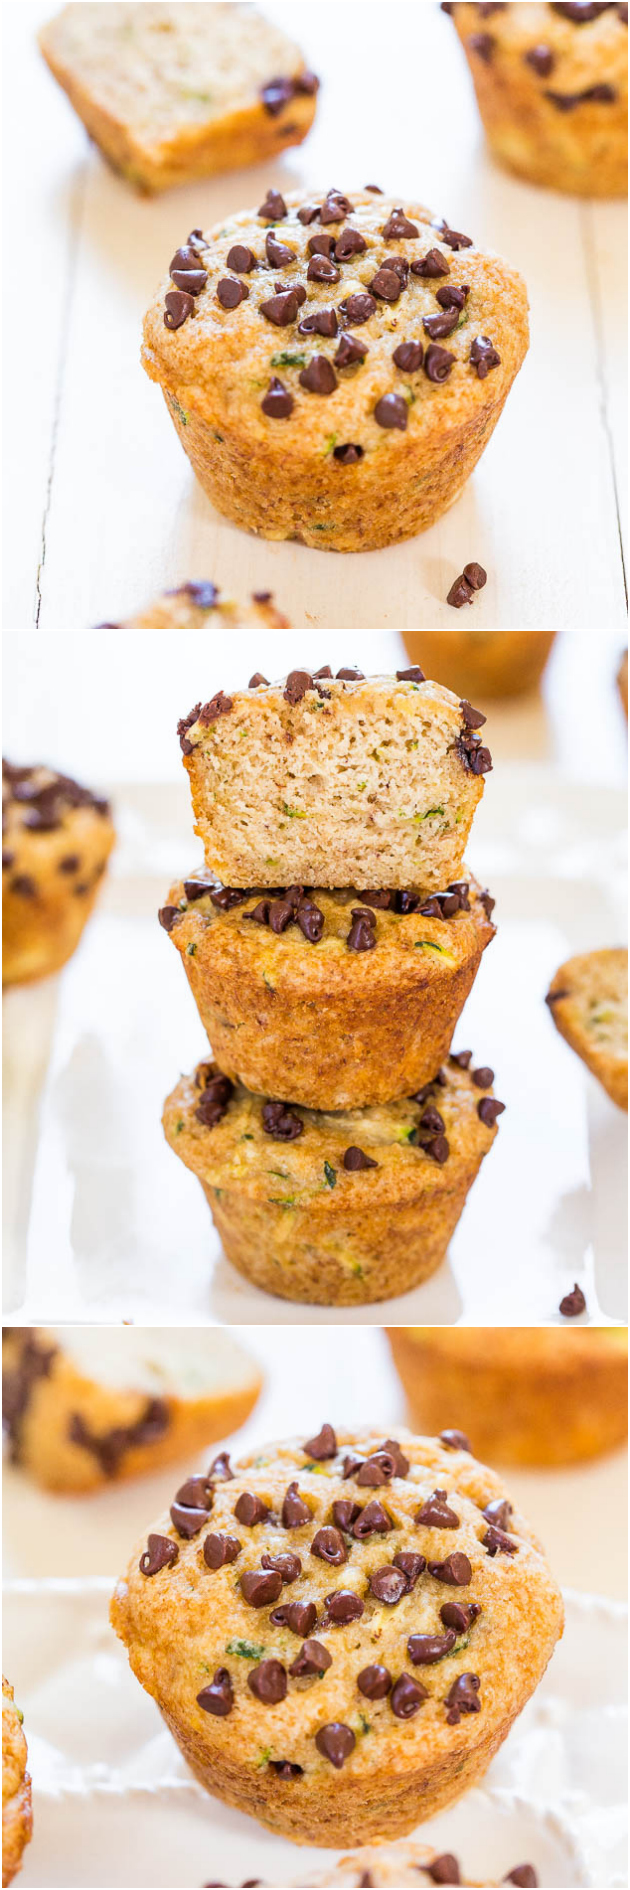 Banana Zucchini Chocolate Chip Muffins — These one-bowl, no-mixer banana zucchini chocolate chip muffins are vegan and healthy. No butter, no eggs, the chocolate chips are solely sprinkled on top, and they're made with coconut oil.